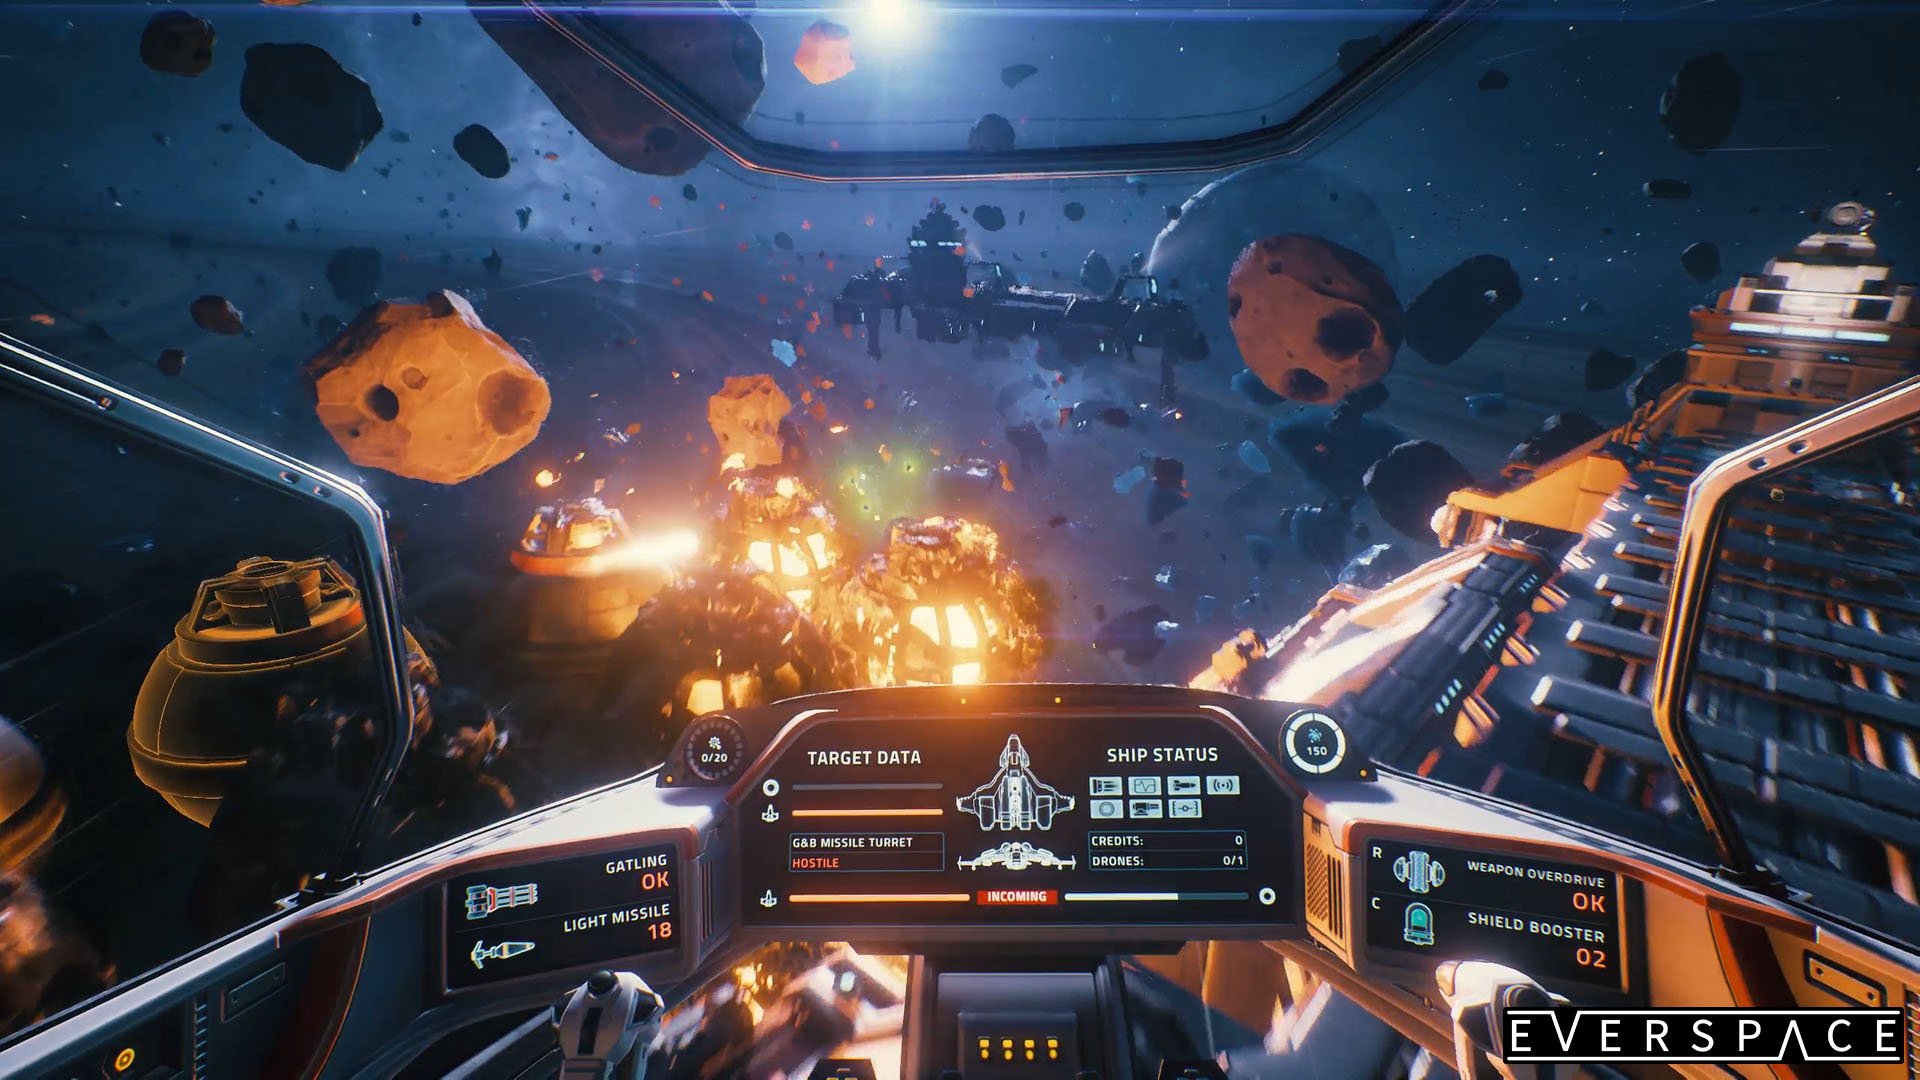 EVERSPACE 2 on Twitter: "Patch fixing several and some gameplay issues just went live https://t.co/4Y1KjxWnXH #space #indiegame #indiedev #Rift @htcvive https://t.co/CVLSfuOrpG" / Twitter